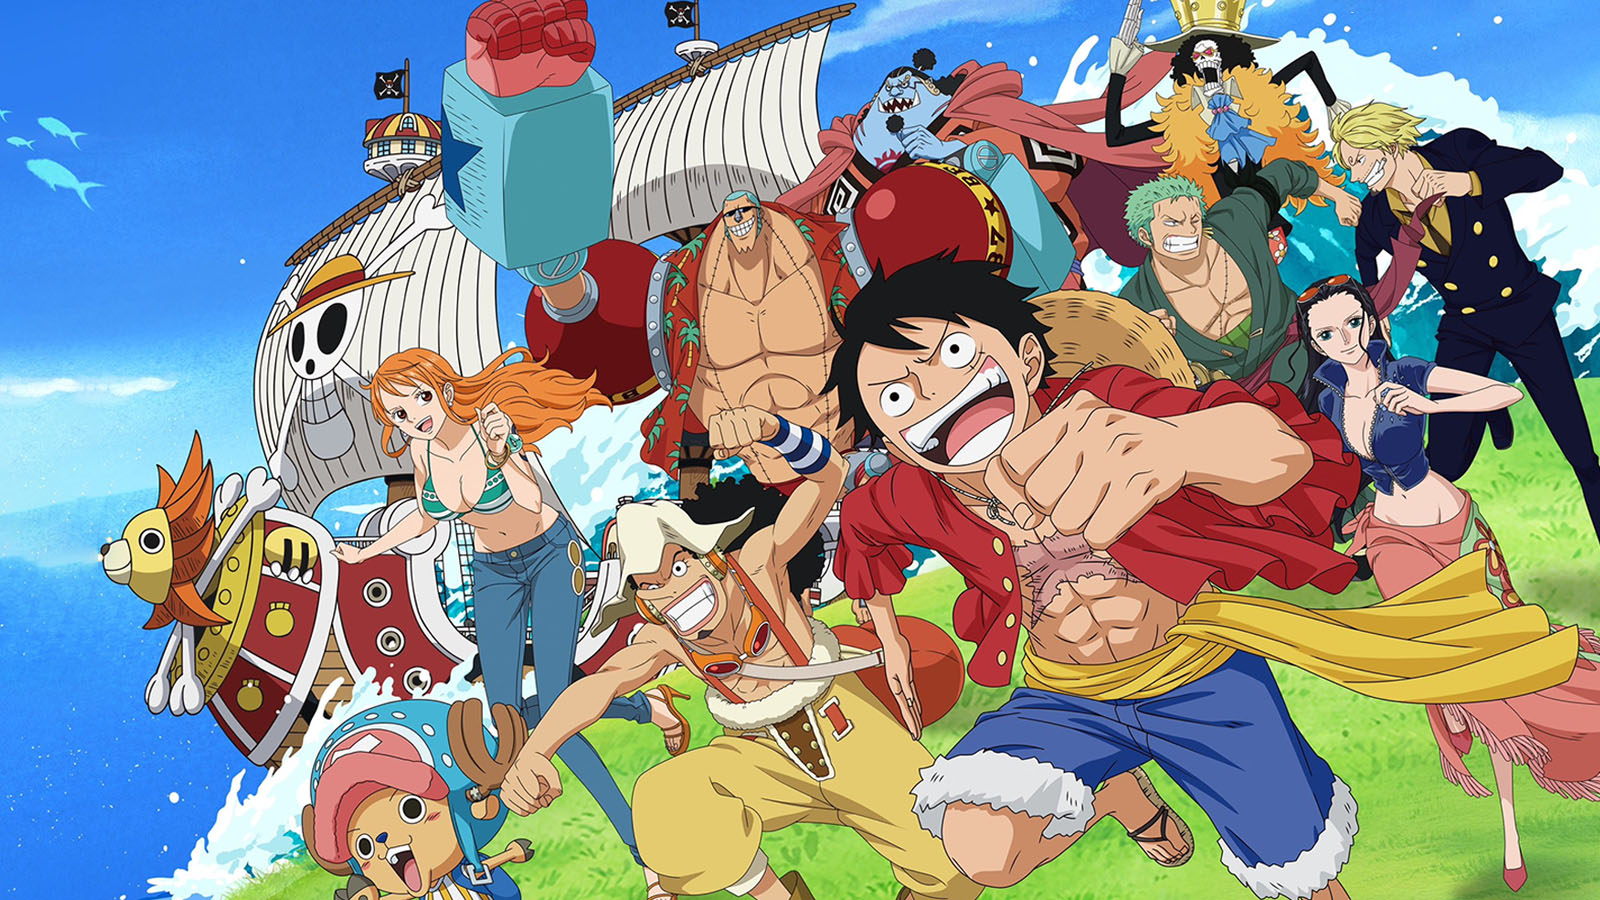 Exciting Sneak Peek: What's New in One Piece Episode 1084 This Weekend?